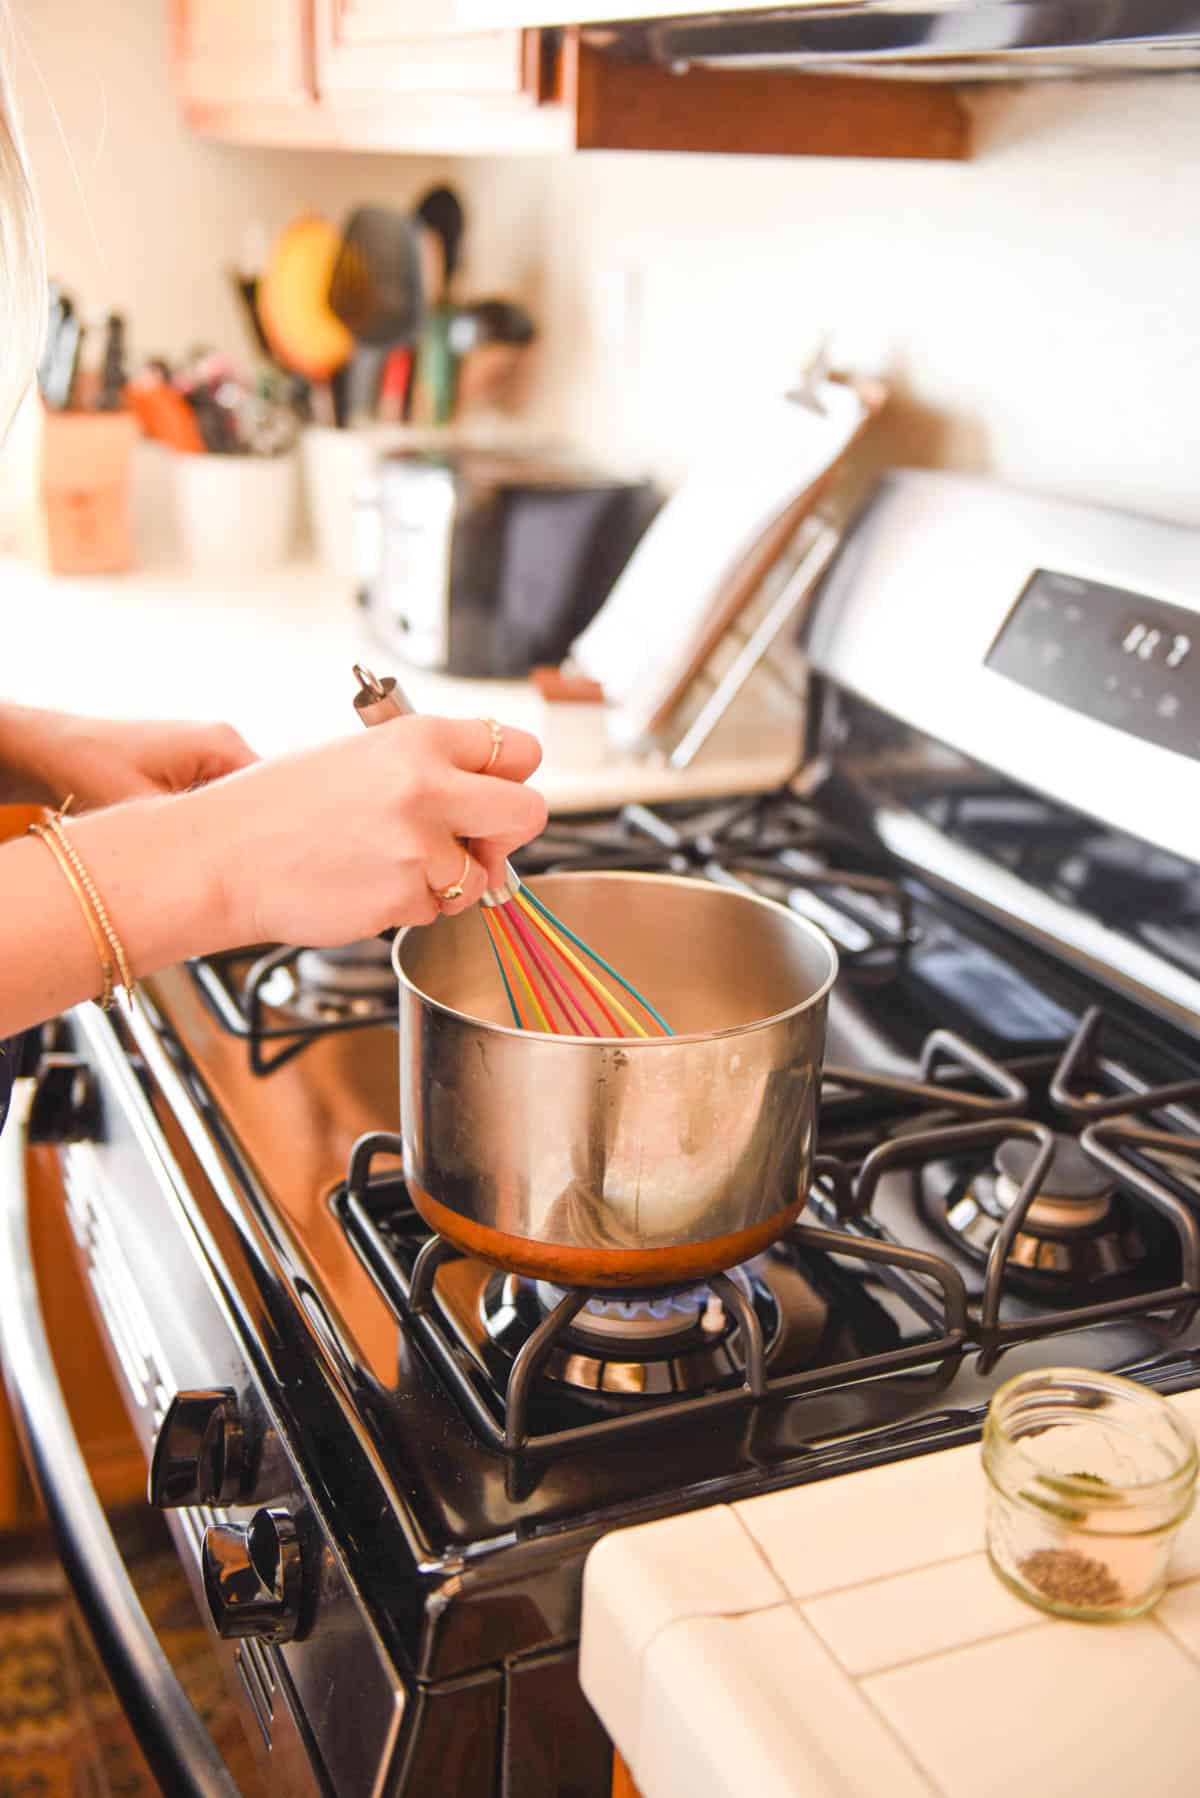 Woman mixing something in a saucepan on the stove.